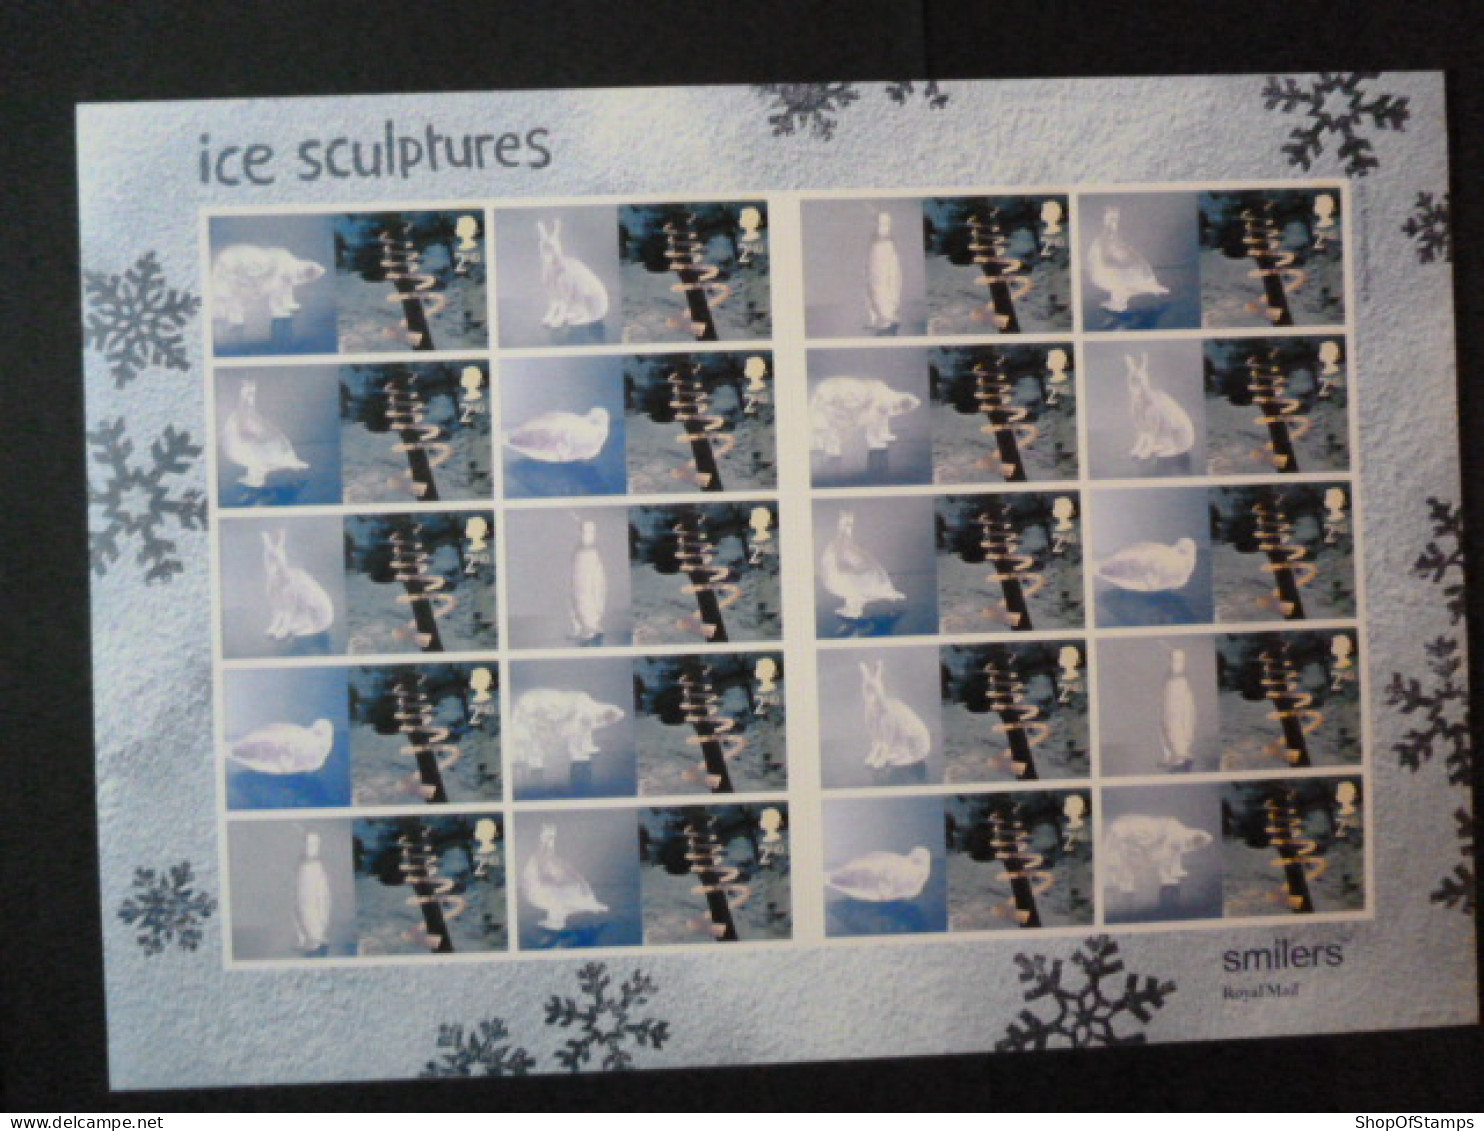 GREAT BRITAIN SG 2410 CHRISTMAS ICE SCULPTURES 20 STAMPS SMILER SHEET WITH GUTTERS & LABELS - Fogli Completi